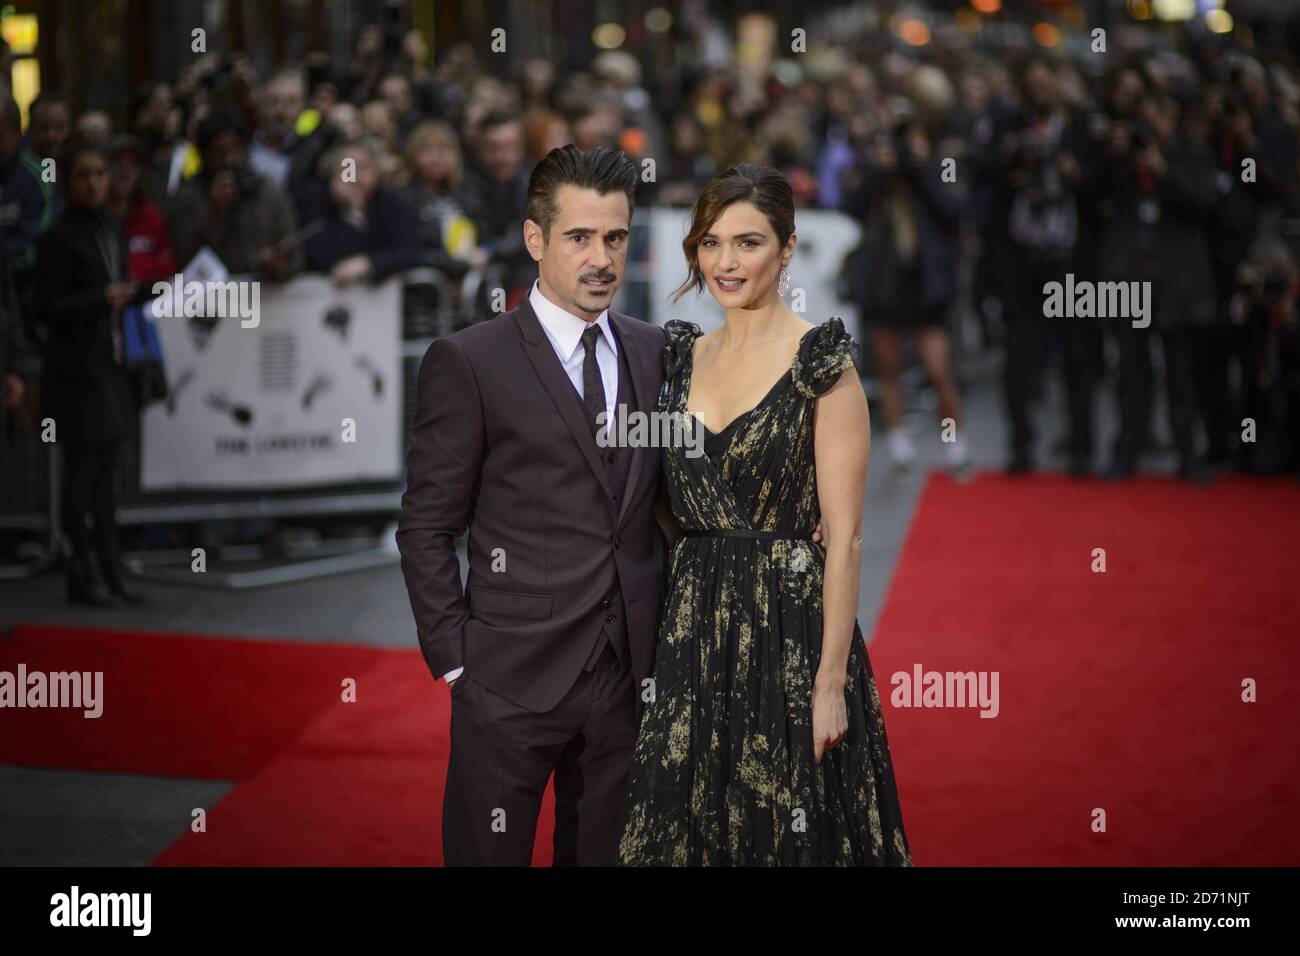 Colin Farrell and Rachel Weisz attending the official screening of The Lobster during the 59th BFI London Film Festival at Vue West End, Leicester Square, London.  Stock Photo